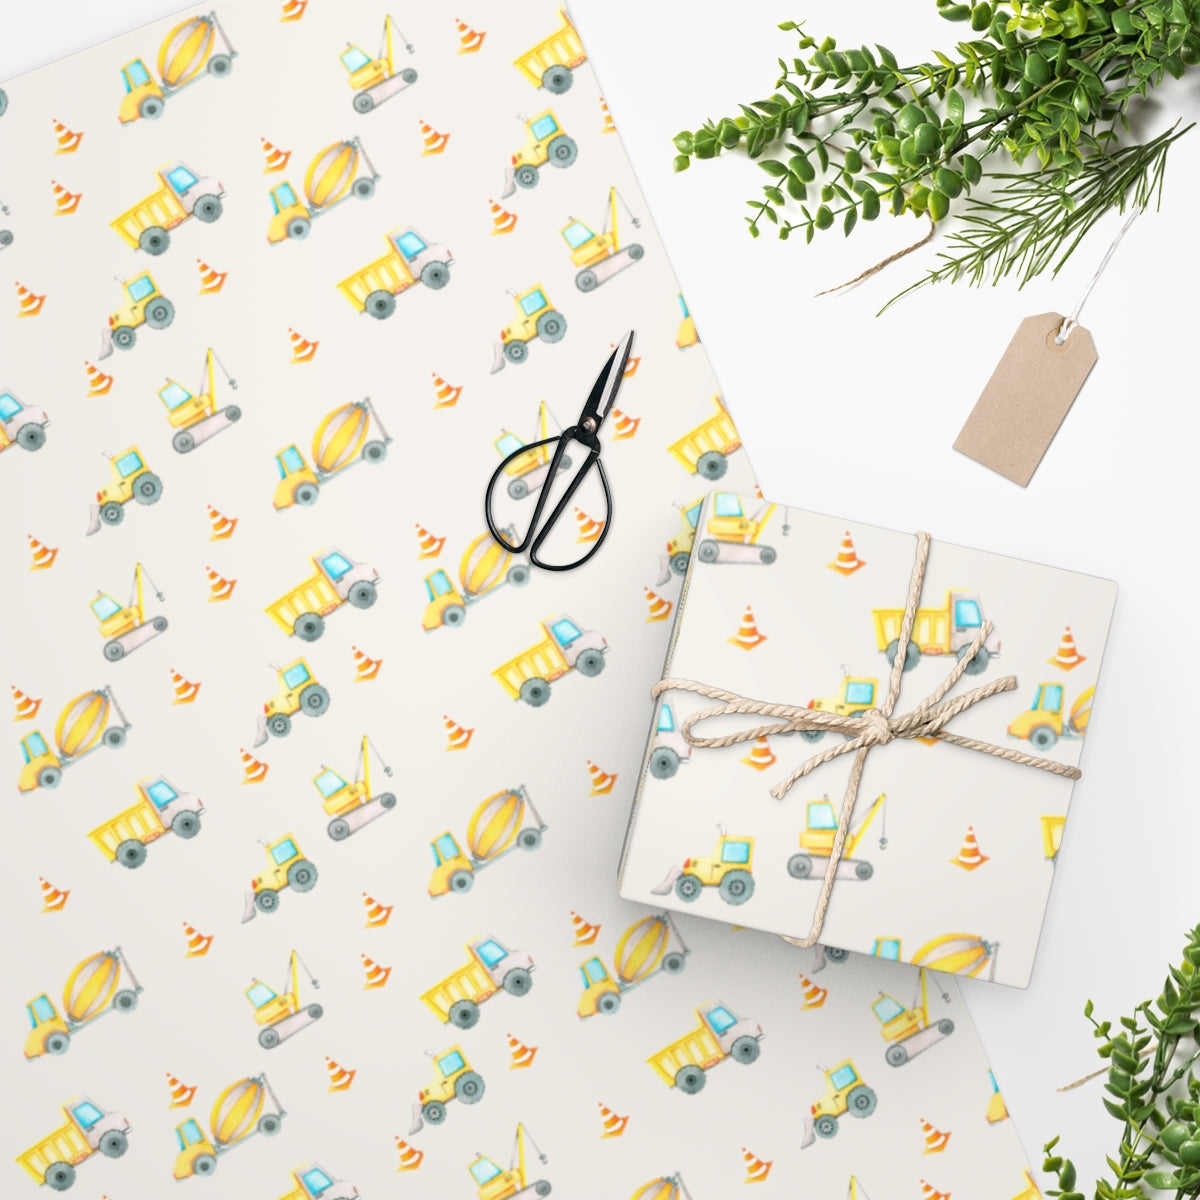 Construction Vehicle Wrapping Paper